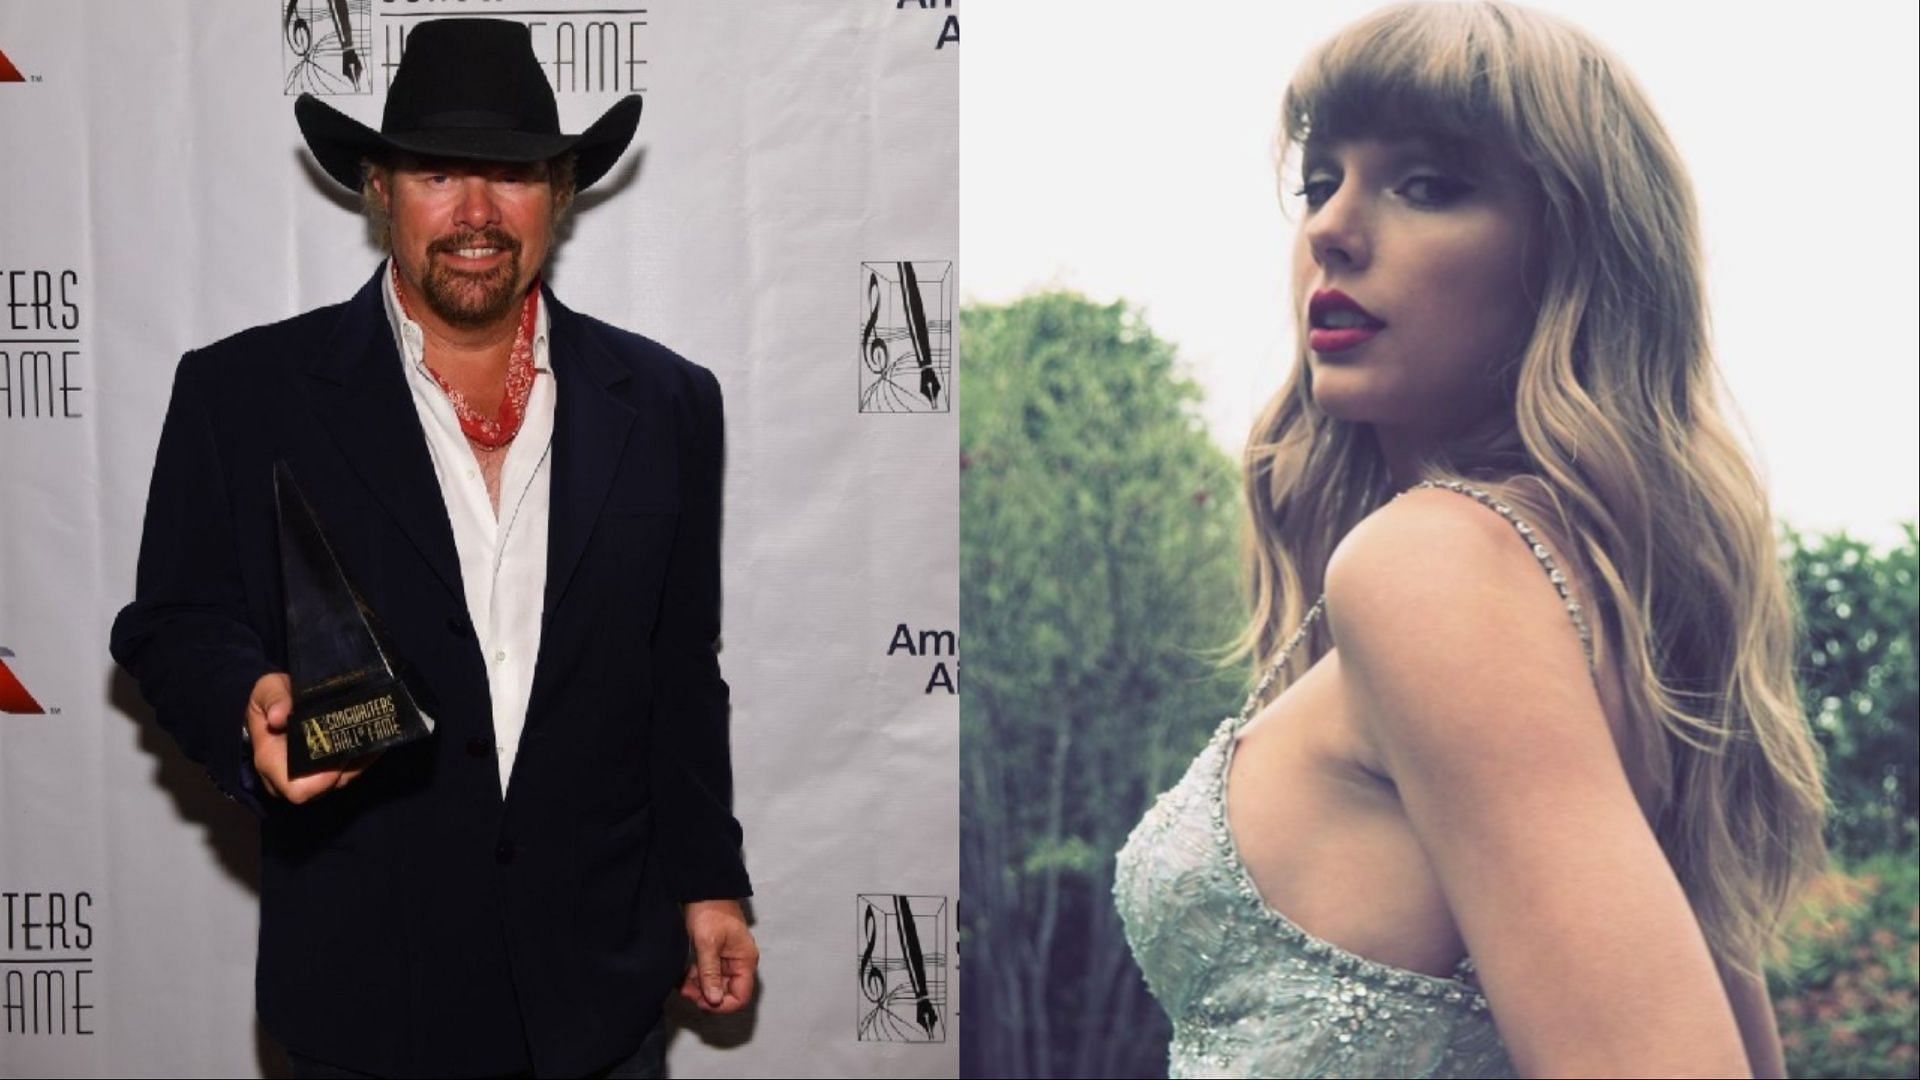 Netizens slam Taylor Swift as singer does not publicly pay tribute to mentor Toby Keith (Image via tobykeith and taylorswift/Instagram)